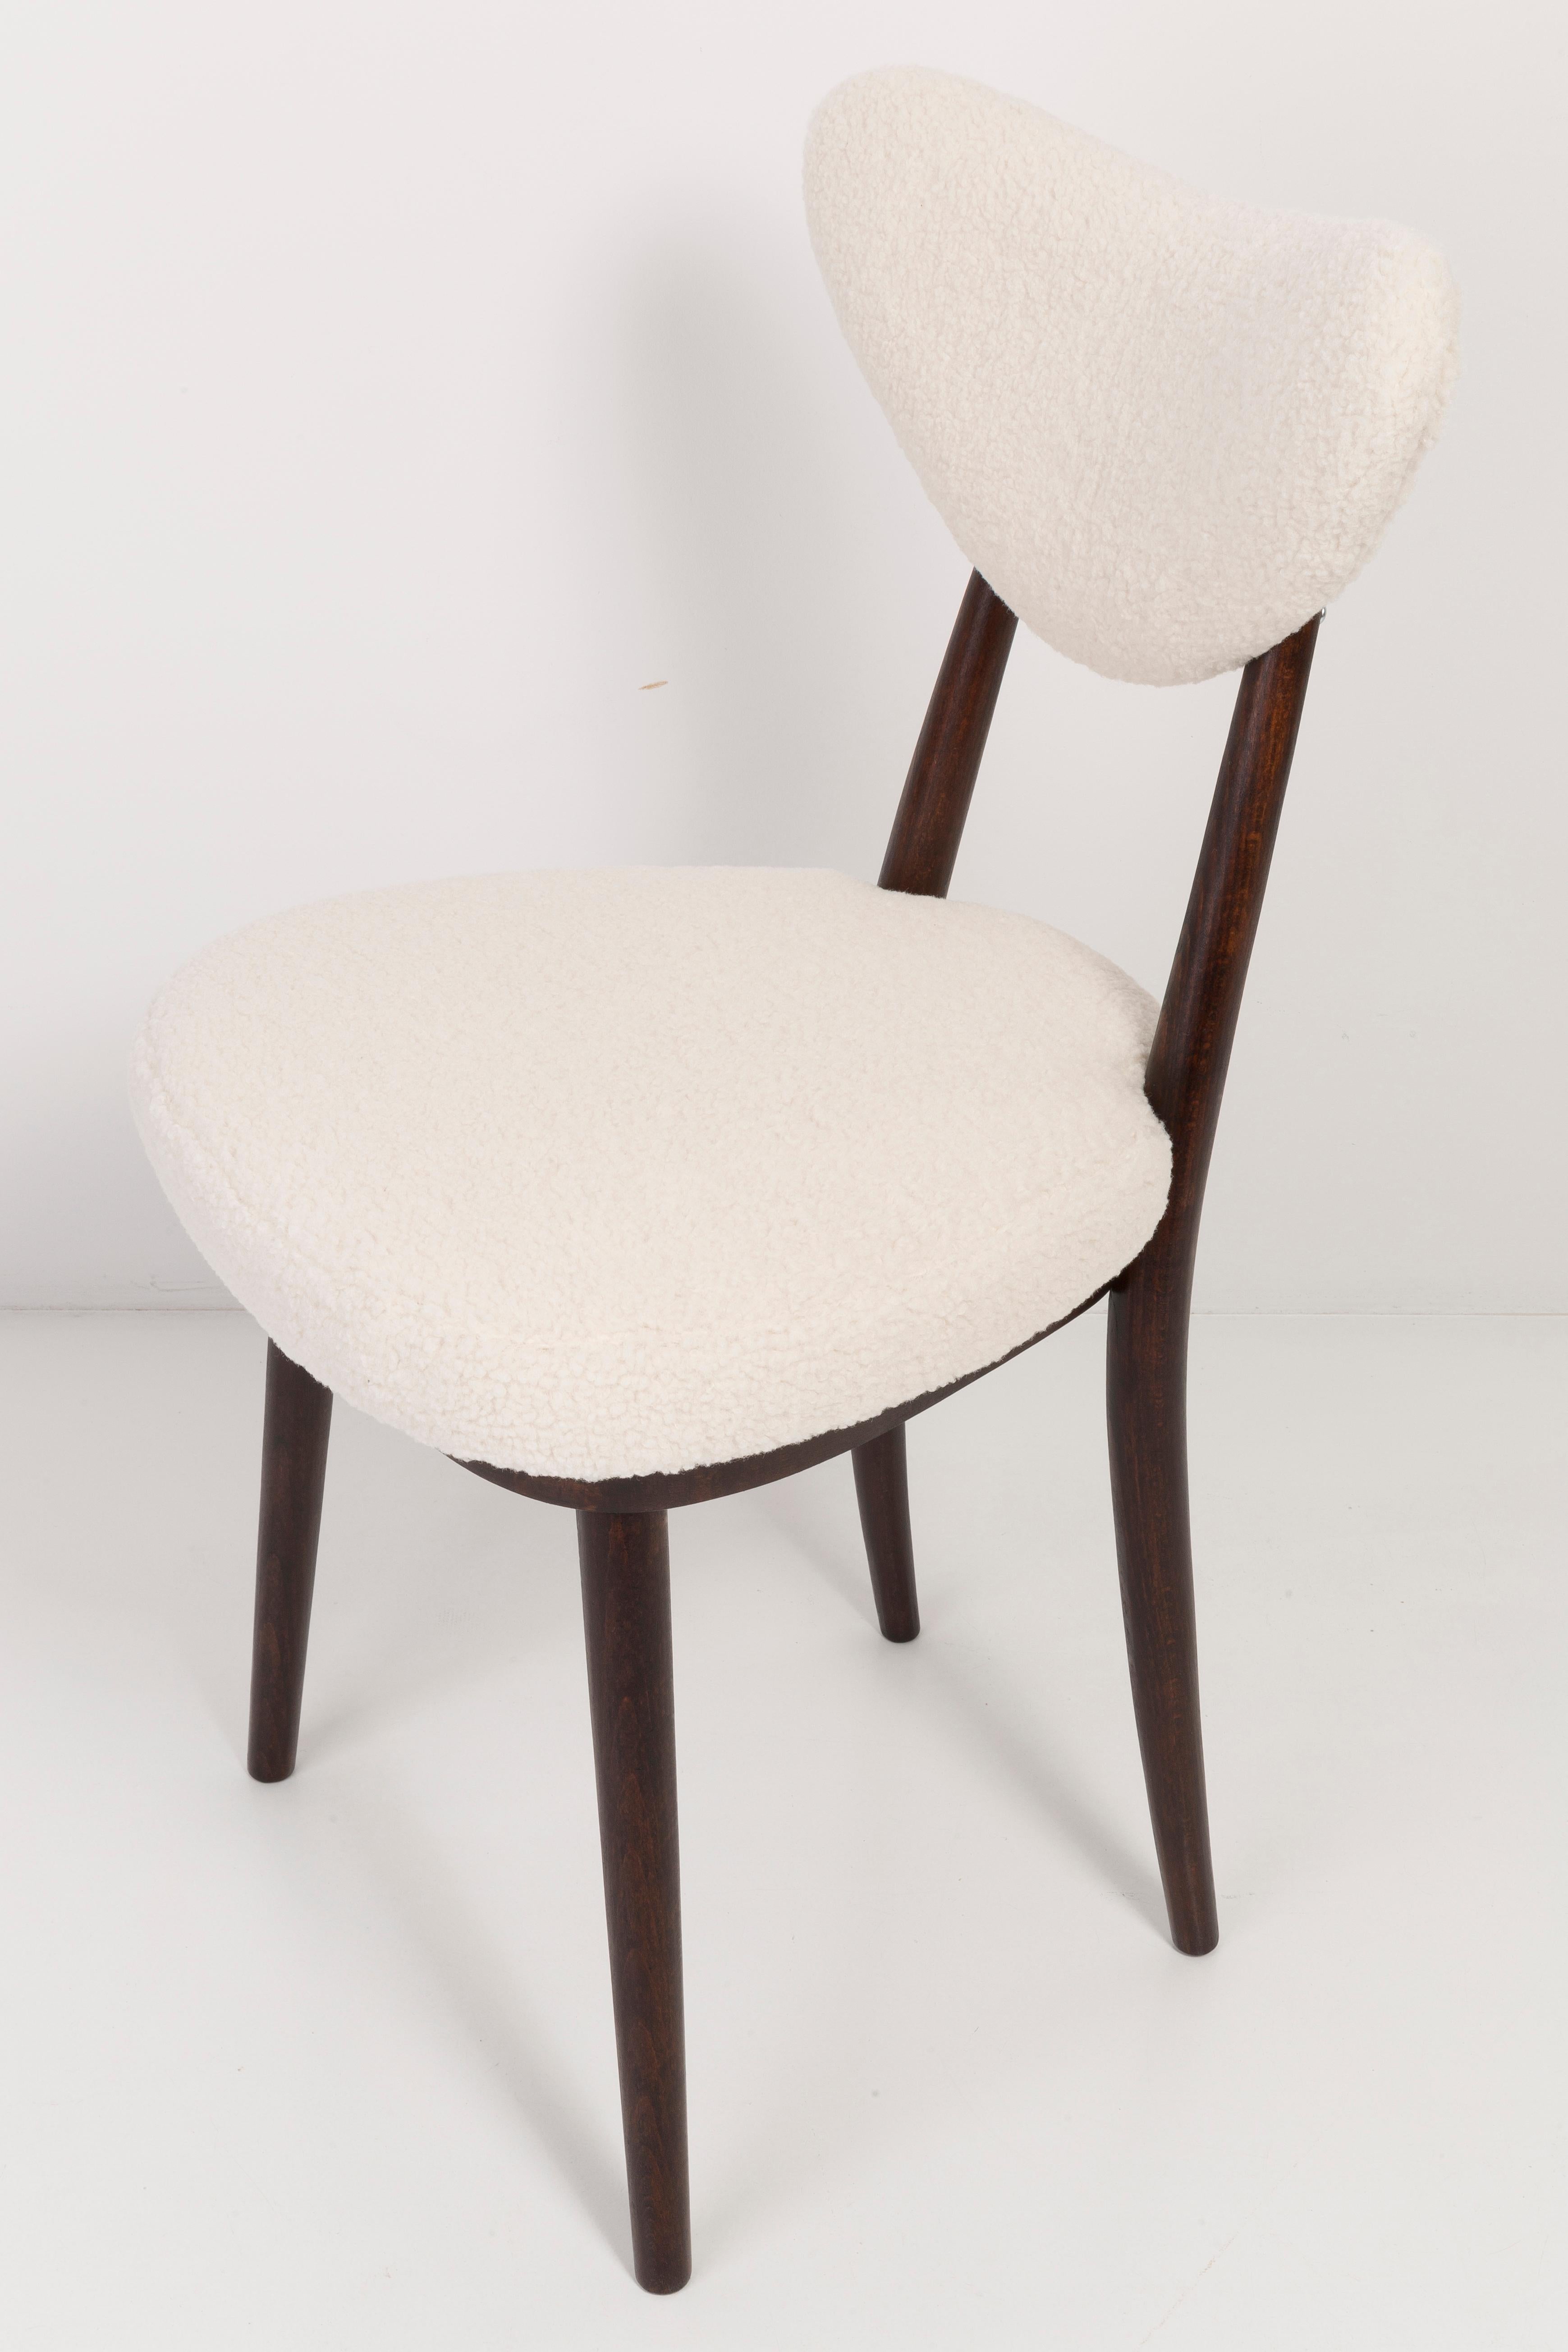 Twelve Light Boucle Heart Chairs, Europe, 1960s For Sale 2